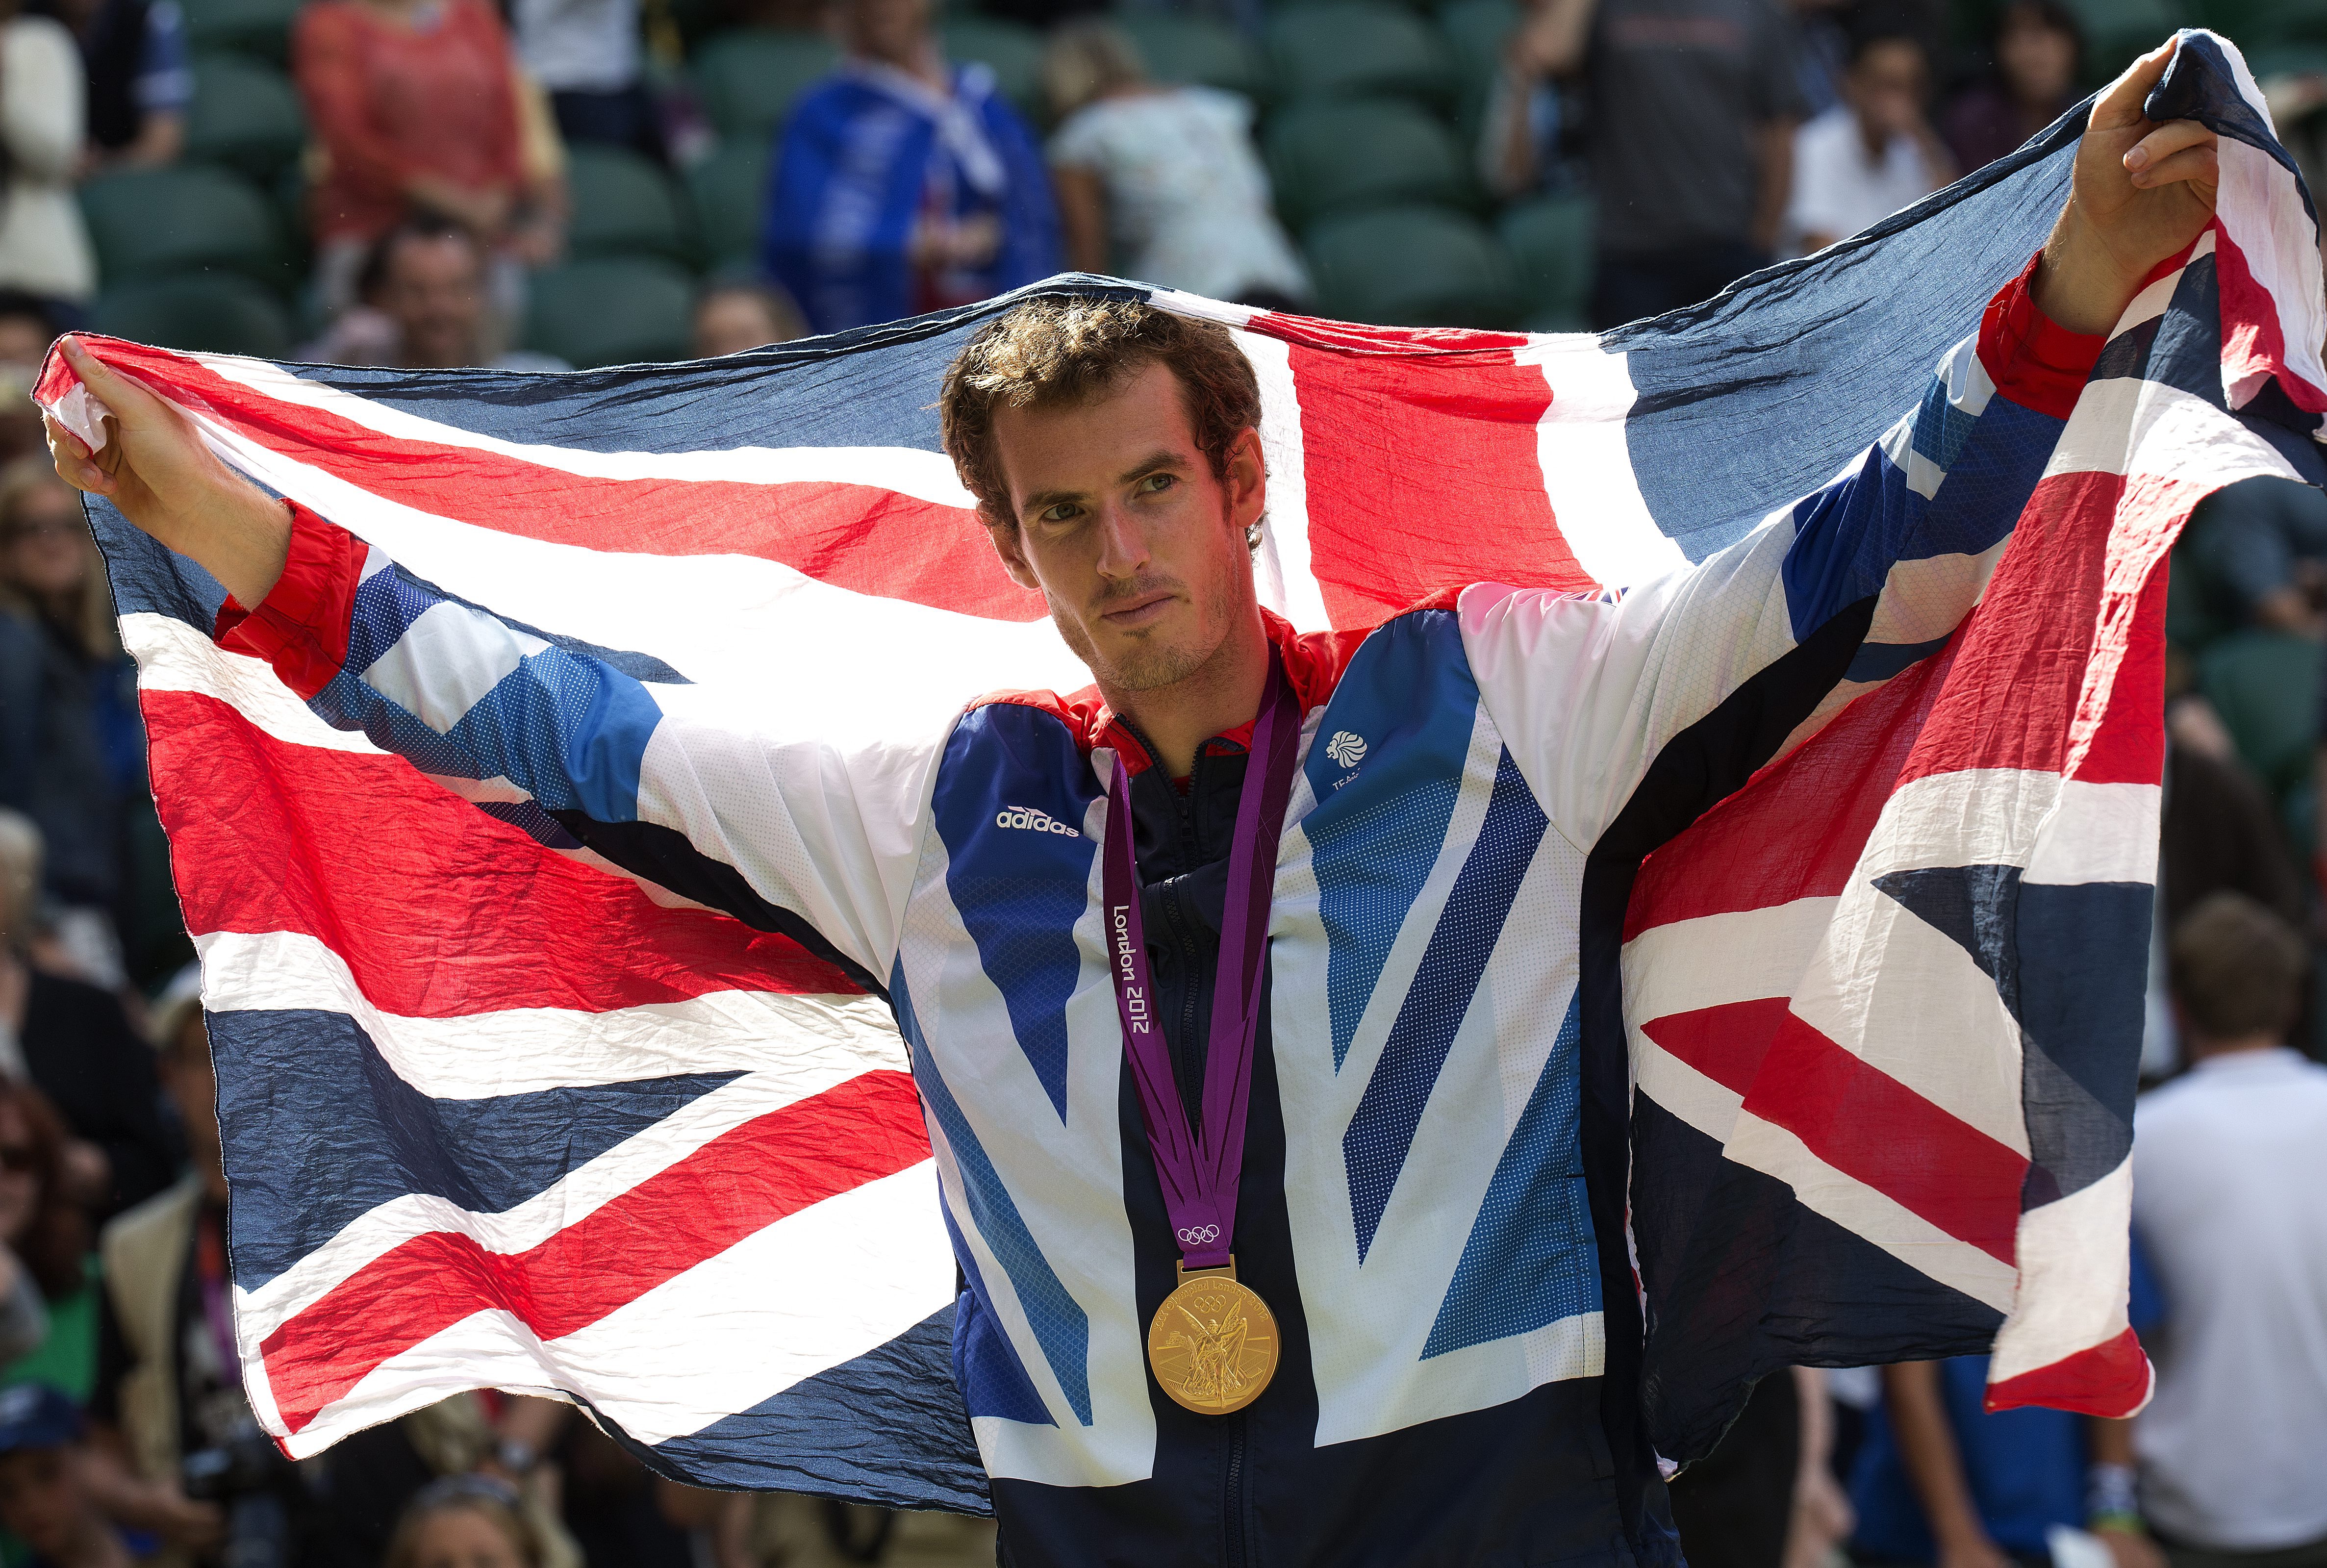 Gold medalist Andy Murray of Great Britain poses after the medal ceremony for the men's singles tennis match at the Olympic Games on Aug. 5, 2012, in London (Professional Sport—Popperfoto/Getty Images)